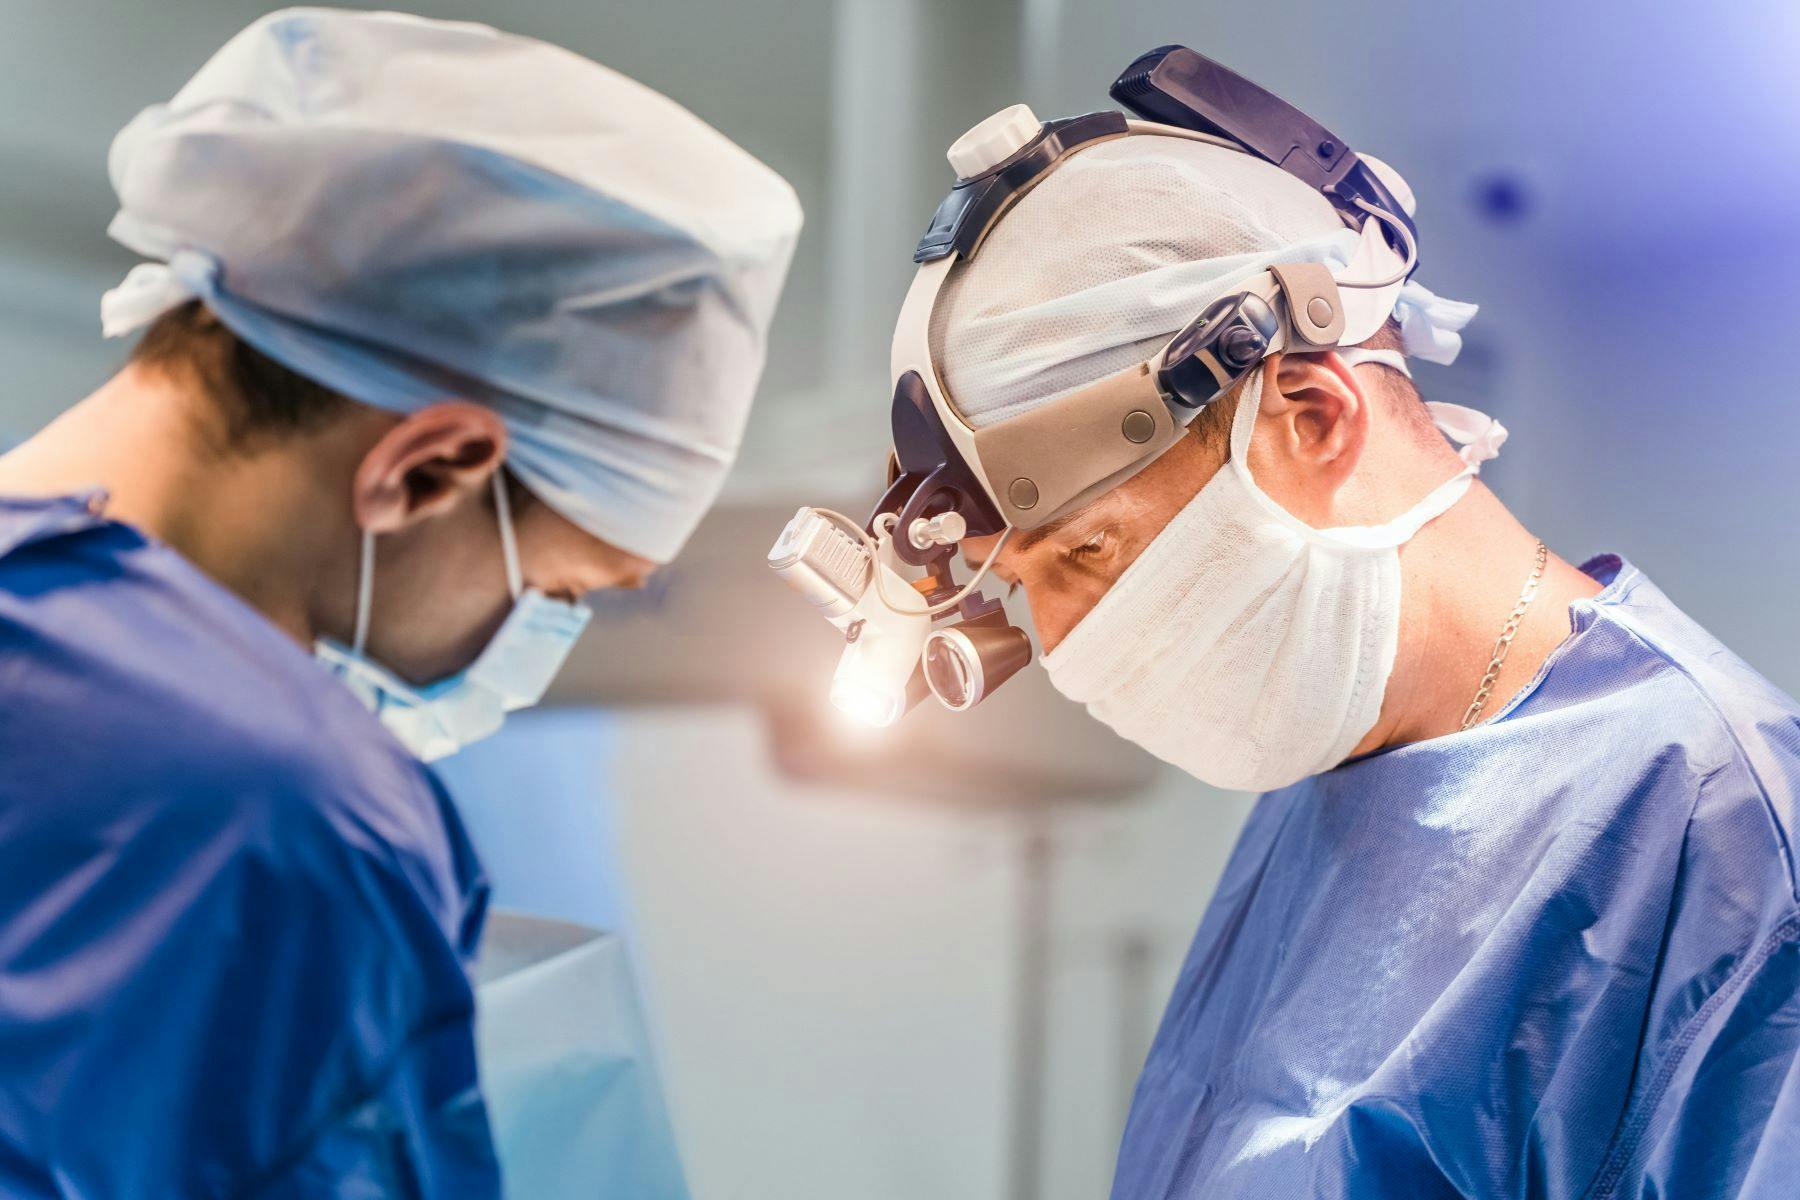 Two surgeons during operation